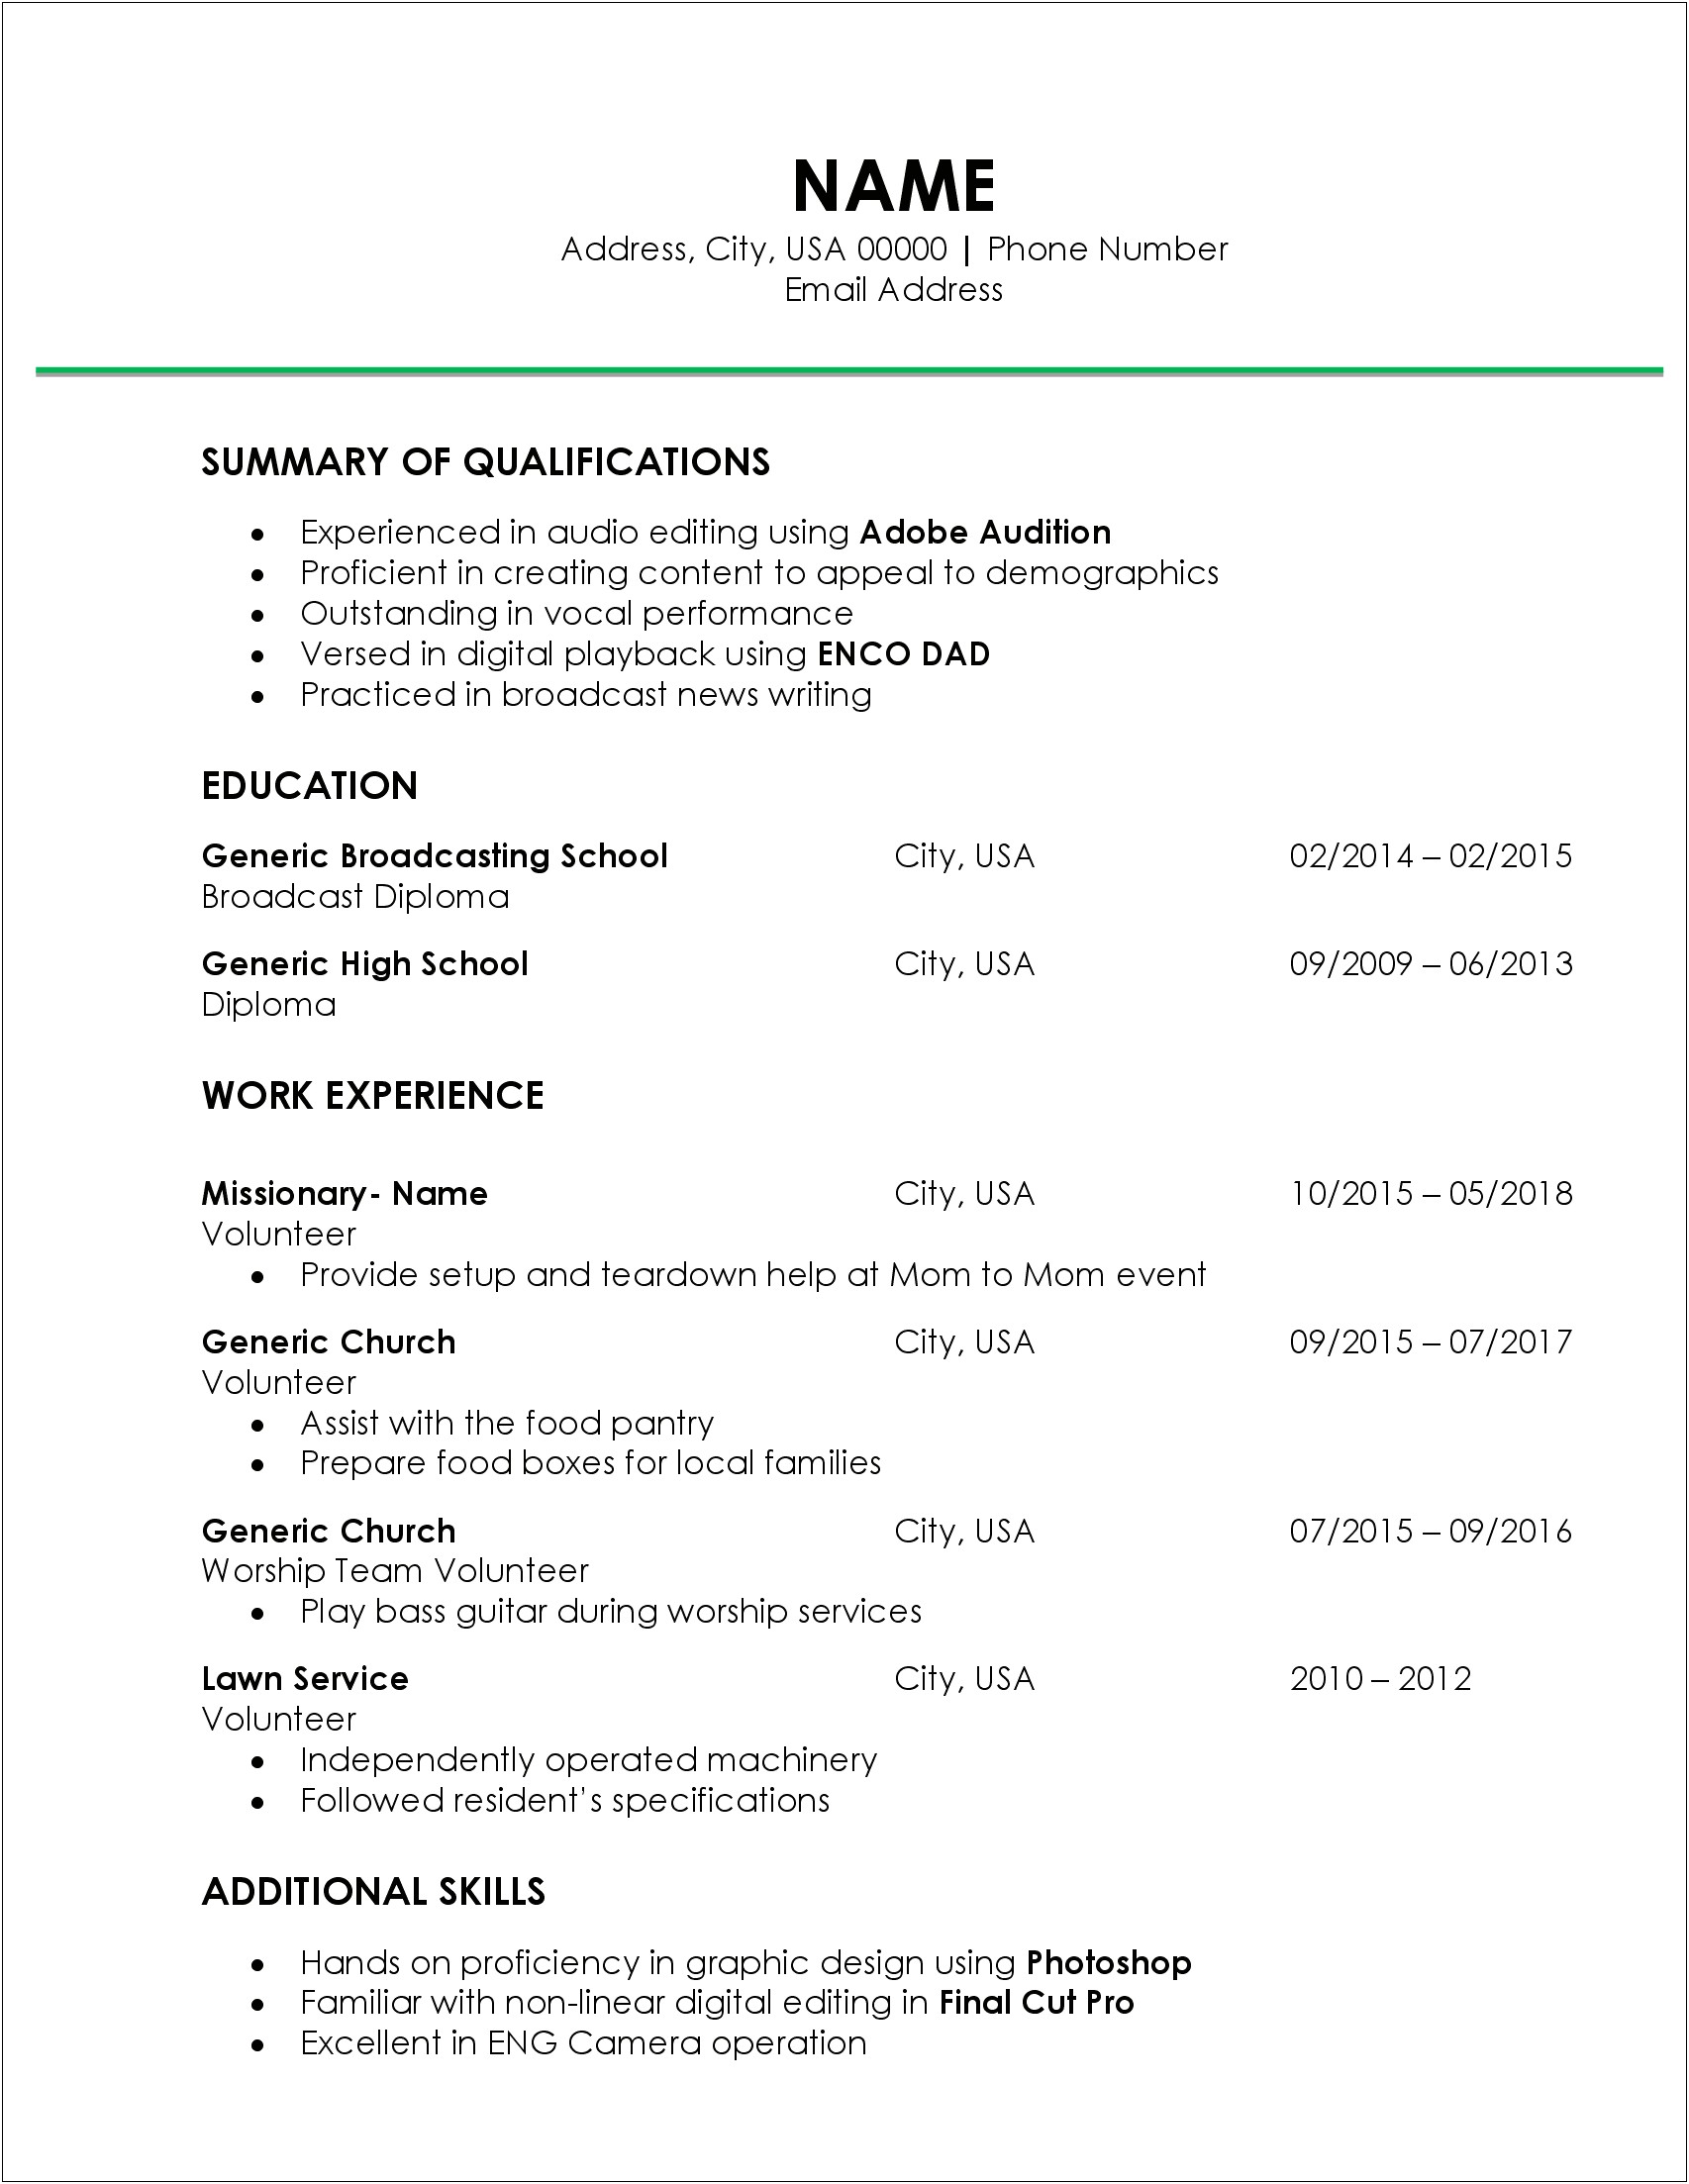 Resume Talking About School Work As Experience